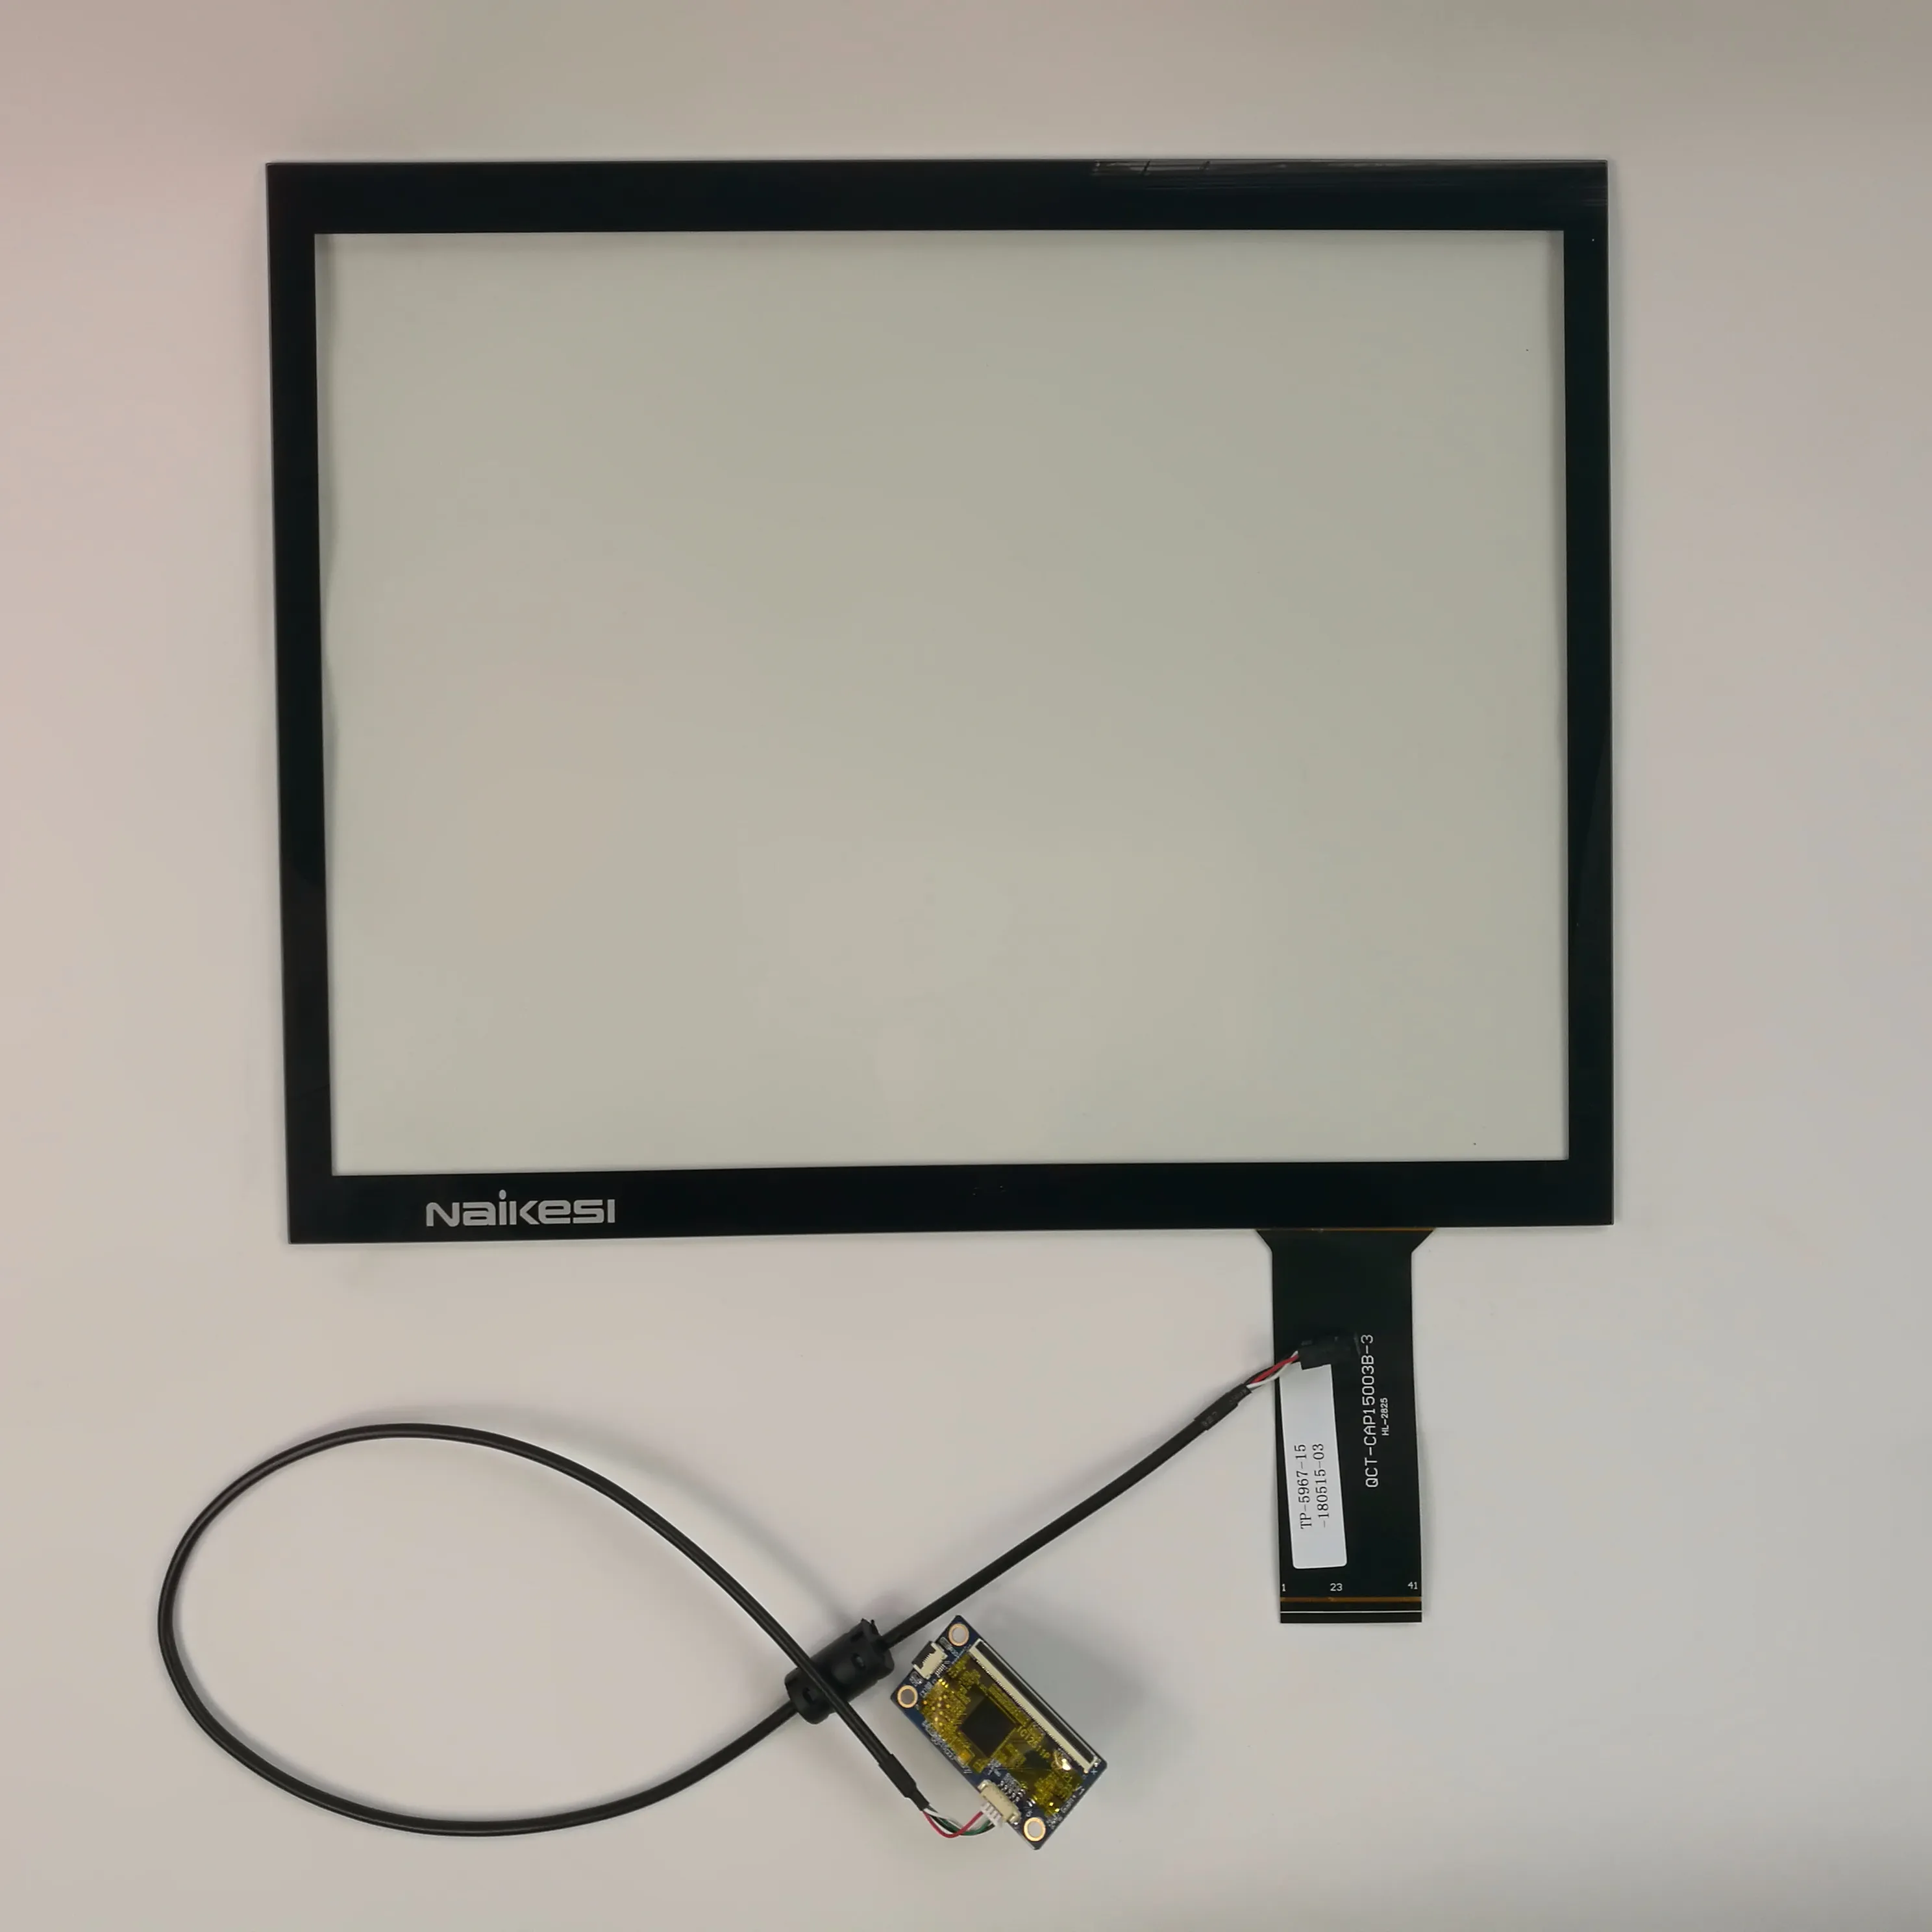 15 17 19 inch LCD monitors china factory capacitive touch screen embedded / Open frame touchscreen